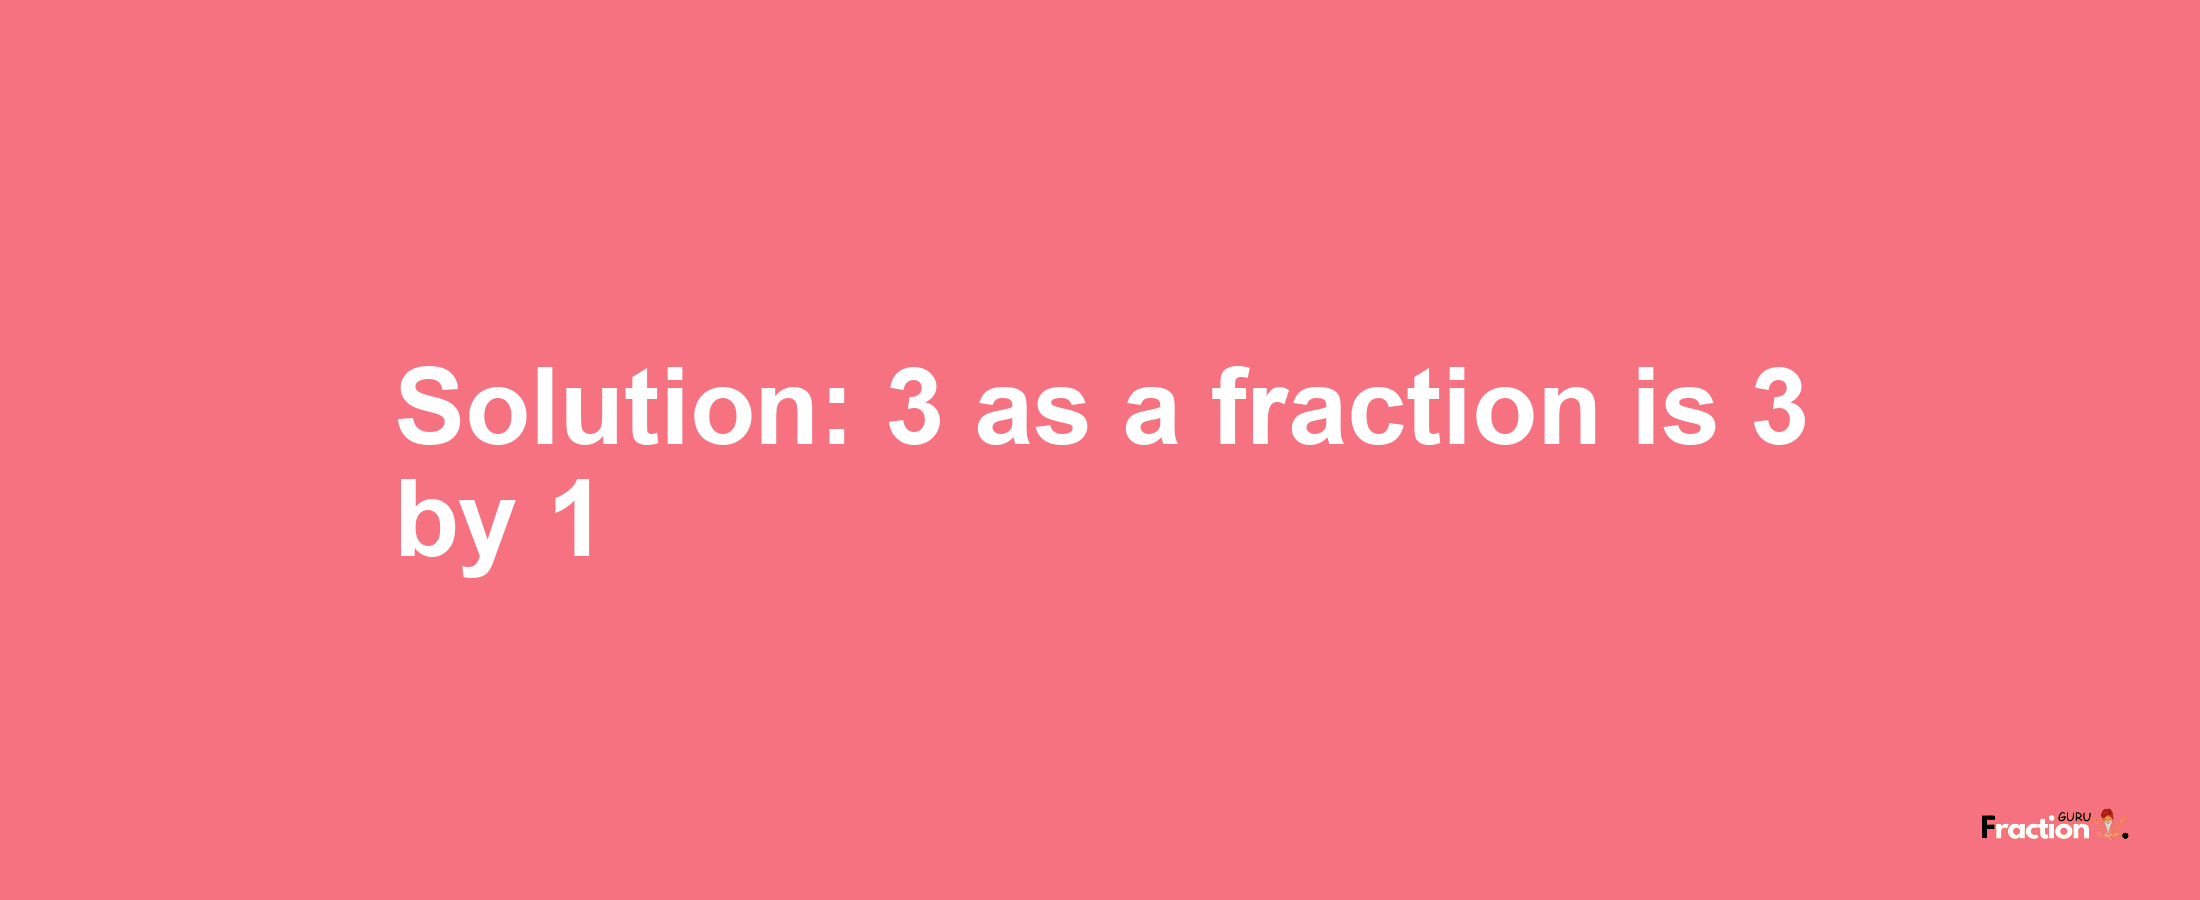 Solution:3 as a fraction is 3/1